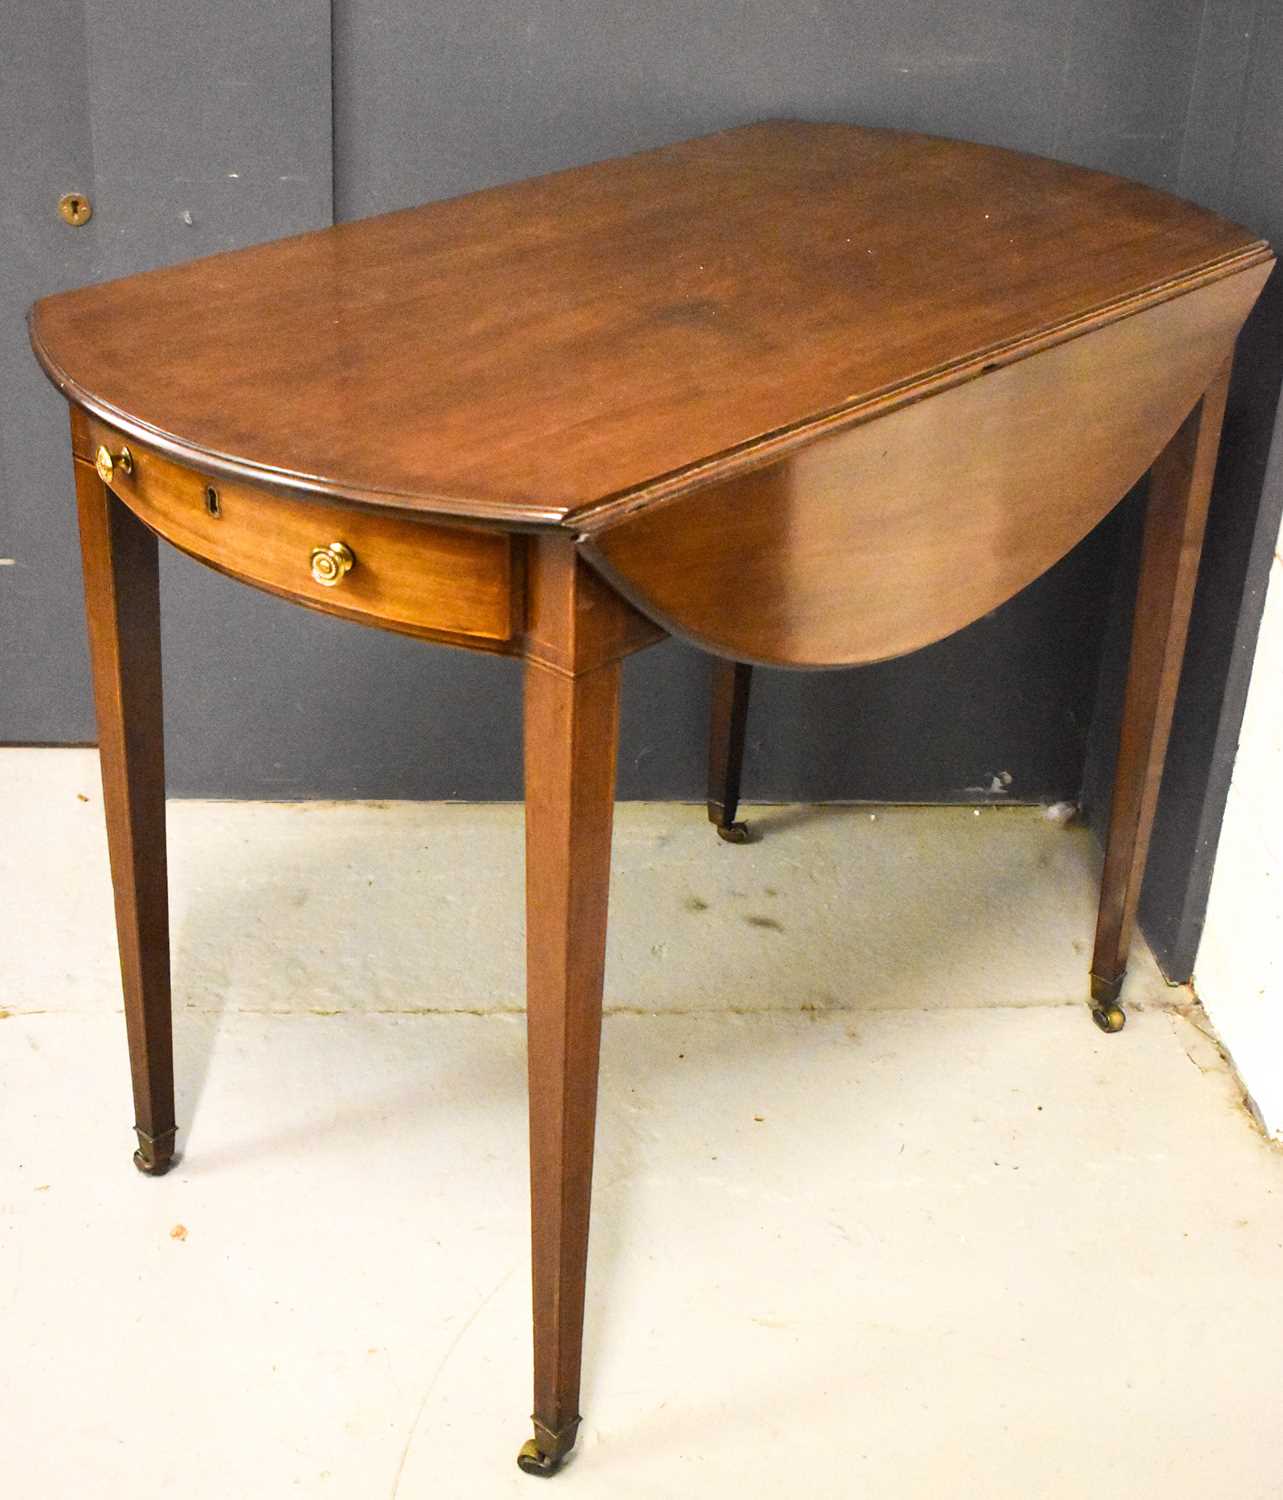 A 19th century mahogany Pembroke table with single drawer on sqaure tapered legs and brass